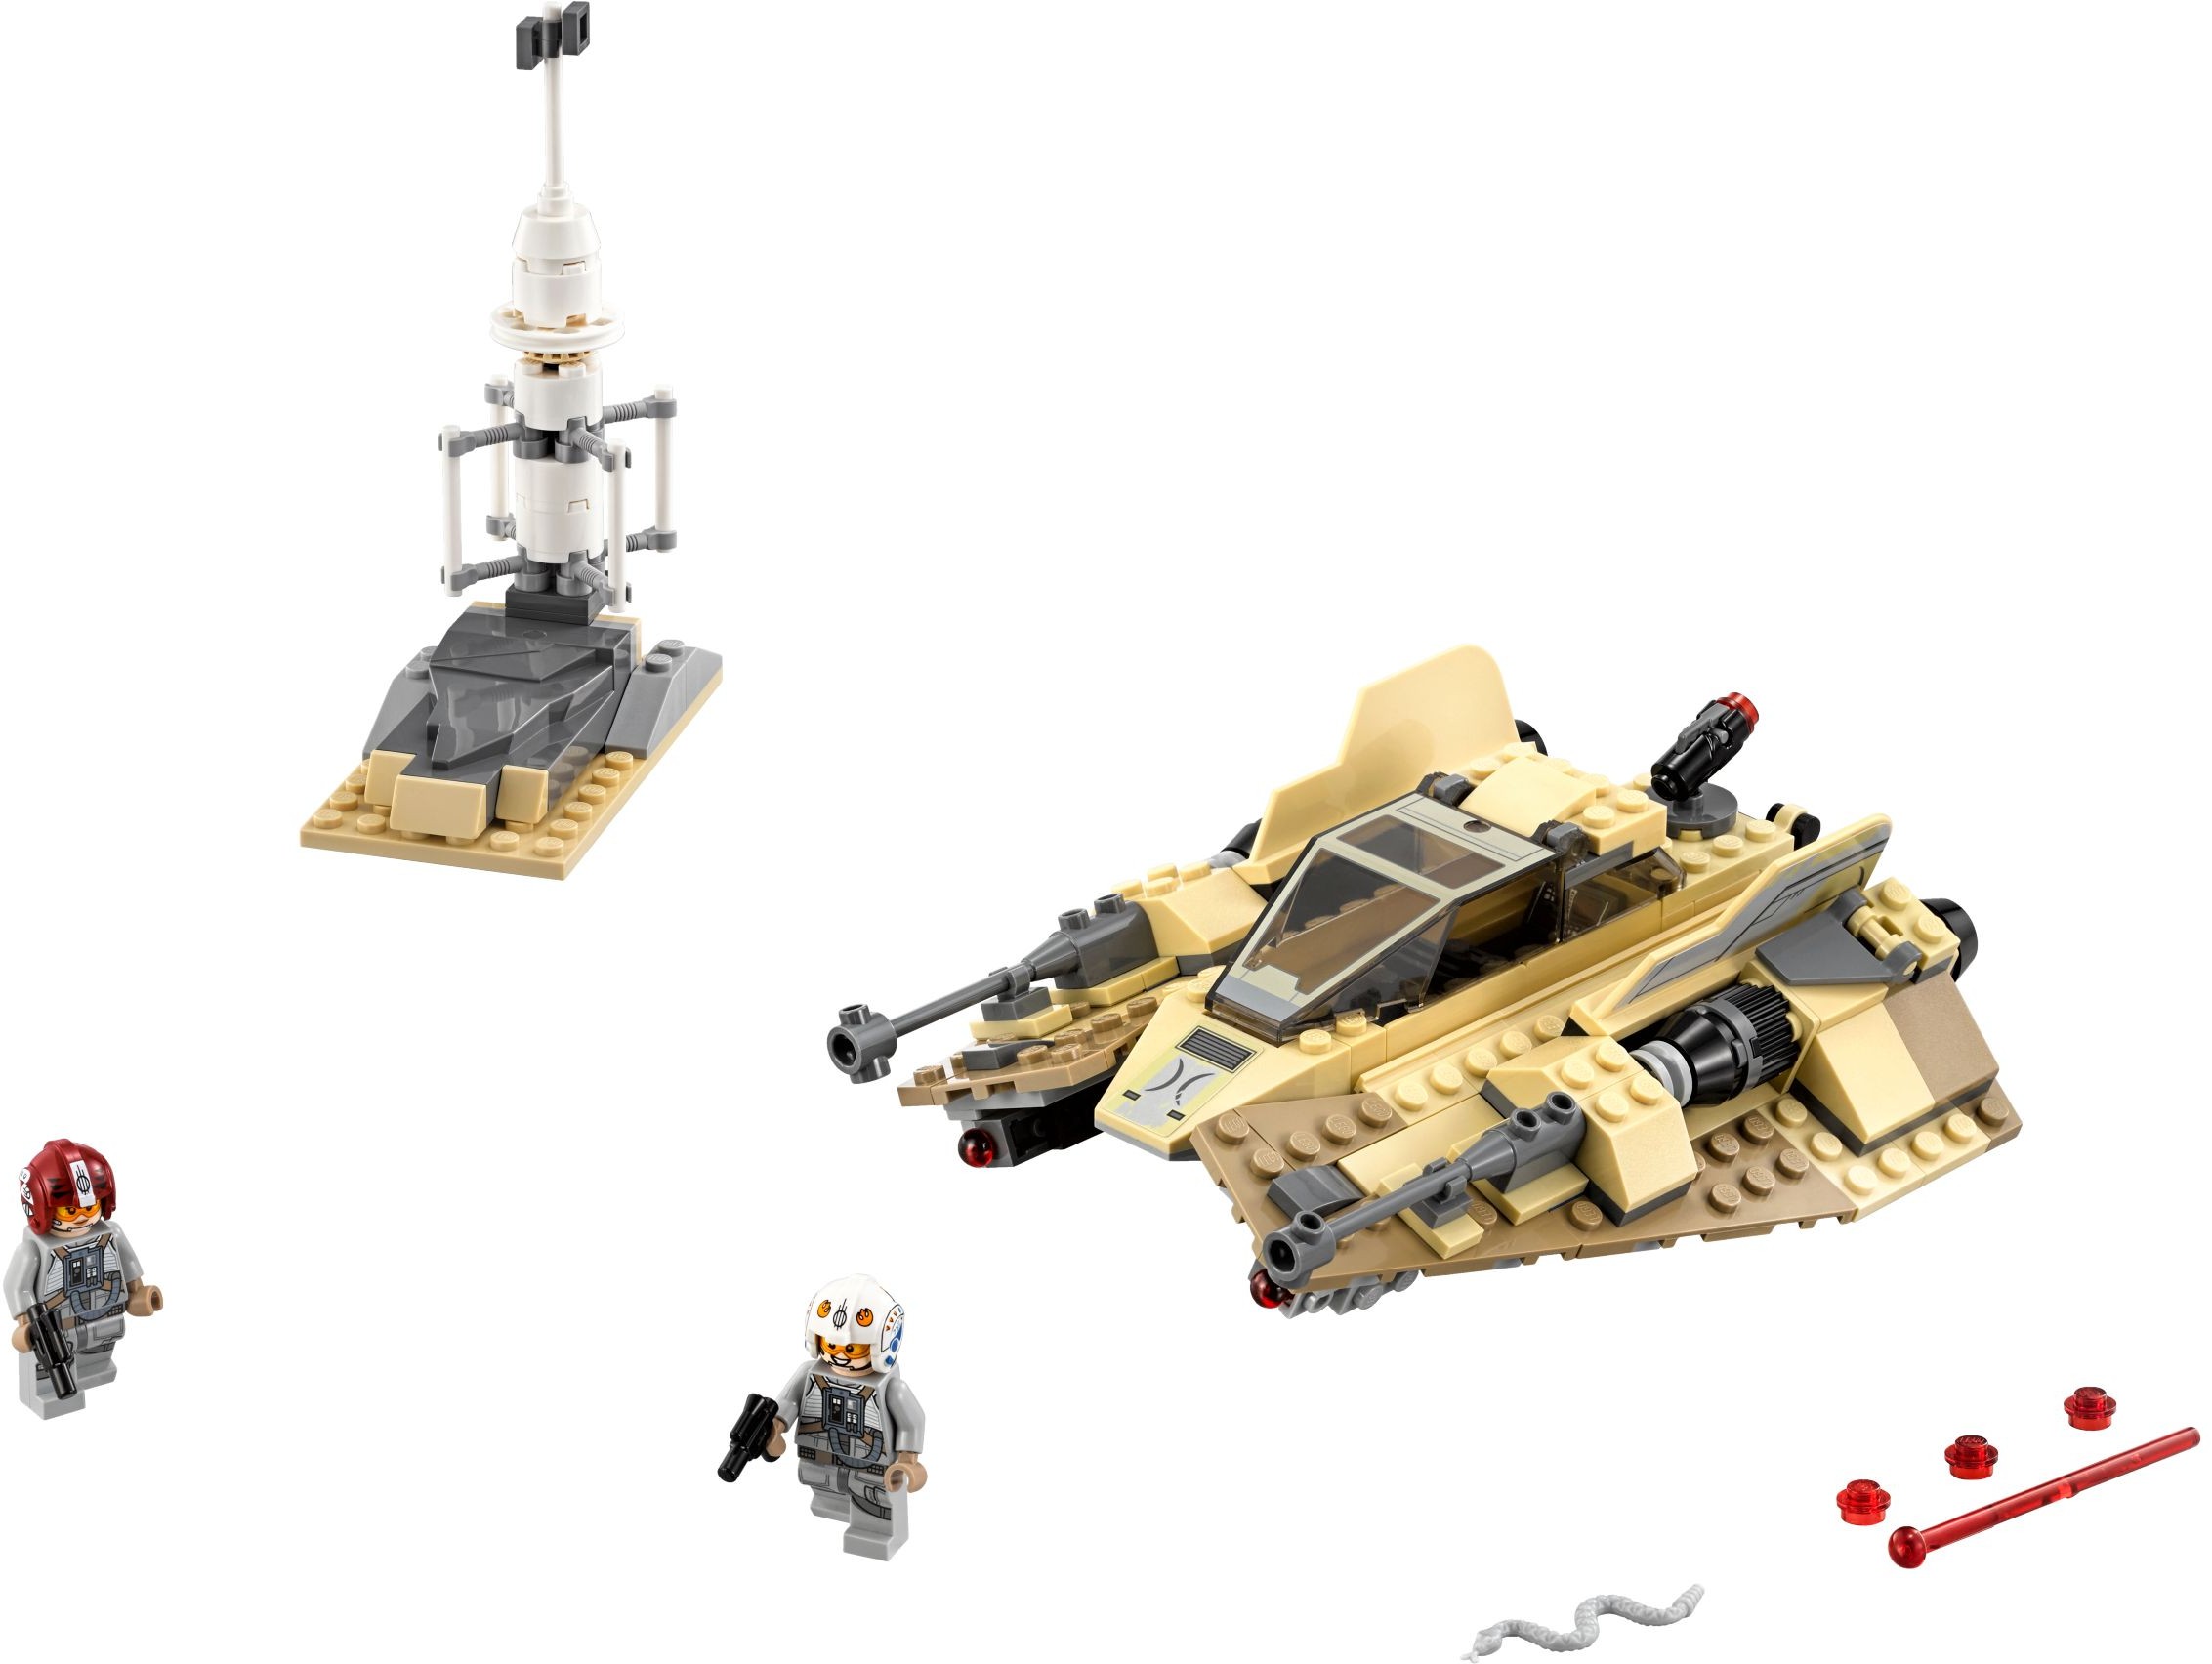  LEGO Star Wars: The Last Jedi Ahch-To Island Training 75200  Building Kit (241 Pieces) (Discontinued by Manufacturer) : Toys & Games